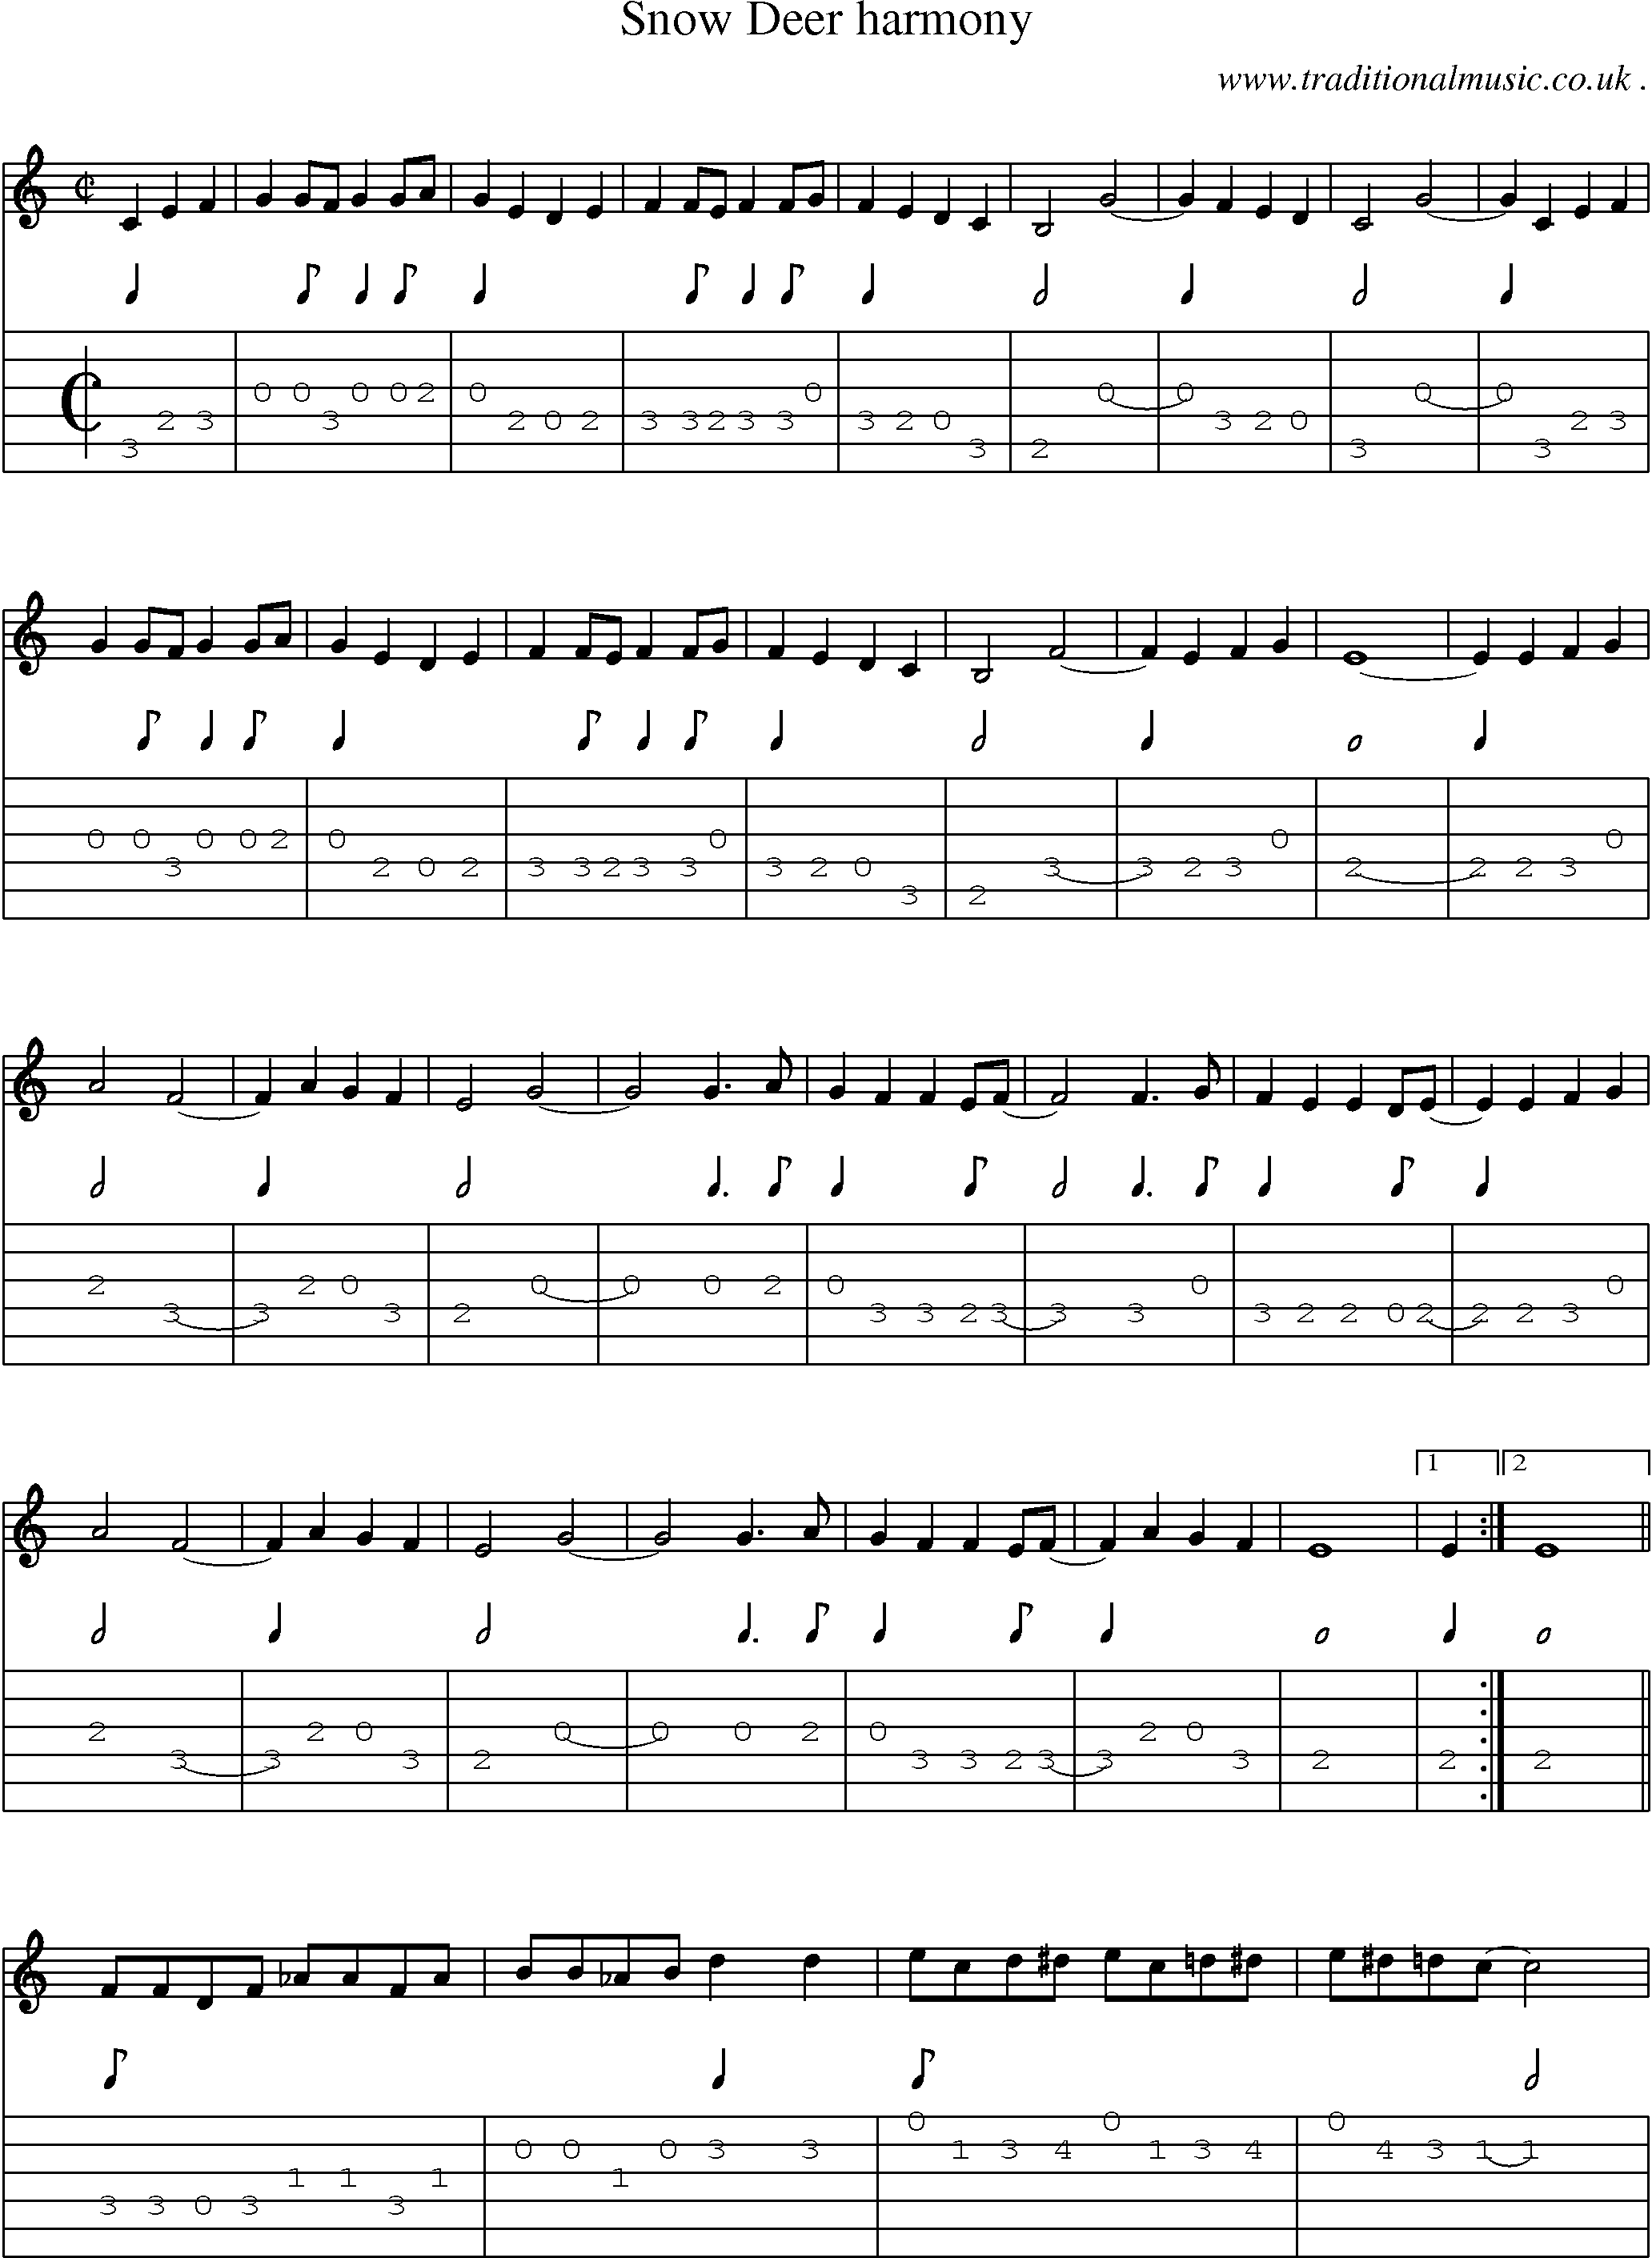 Music Score and Guitar Tabs for Snow Deer Harmony